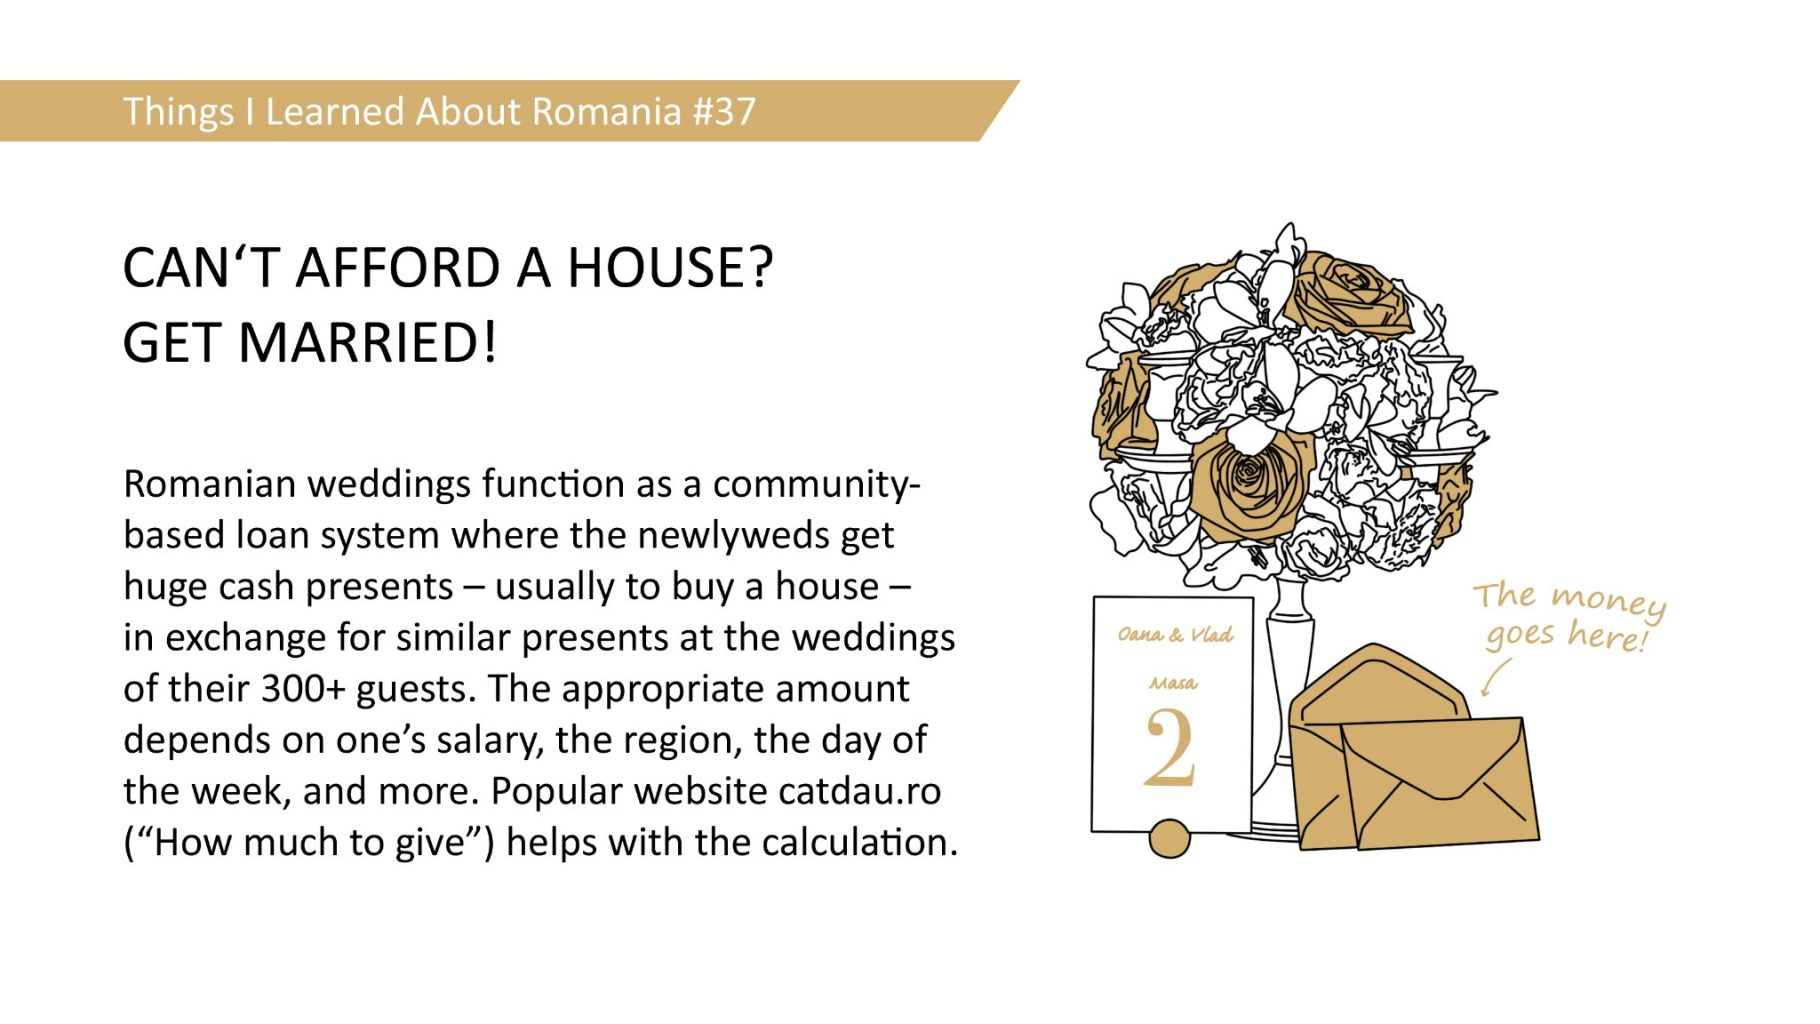 CAN'T AFFORD A HOUSE? GET MARRIED! - Romanian weddings function as a community- based loan system where the newlyweds get huge cash presents - usually to buy a house - in exchange for similar presents at the weddings of their 300+ guests. The appropriate amount depends on one's salary, the region, the day of the week, and more. Popular website catdau.ro ("How much to give") helps with the calculation.